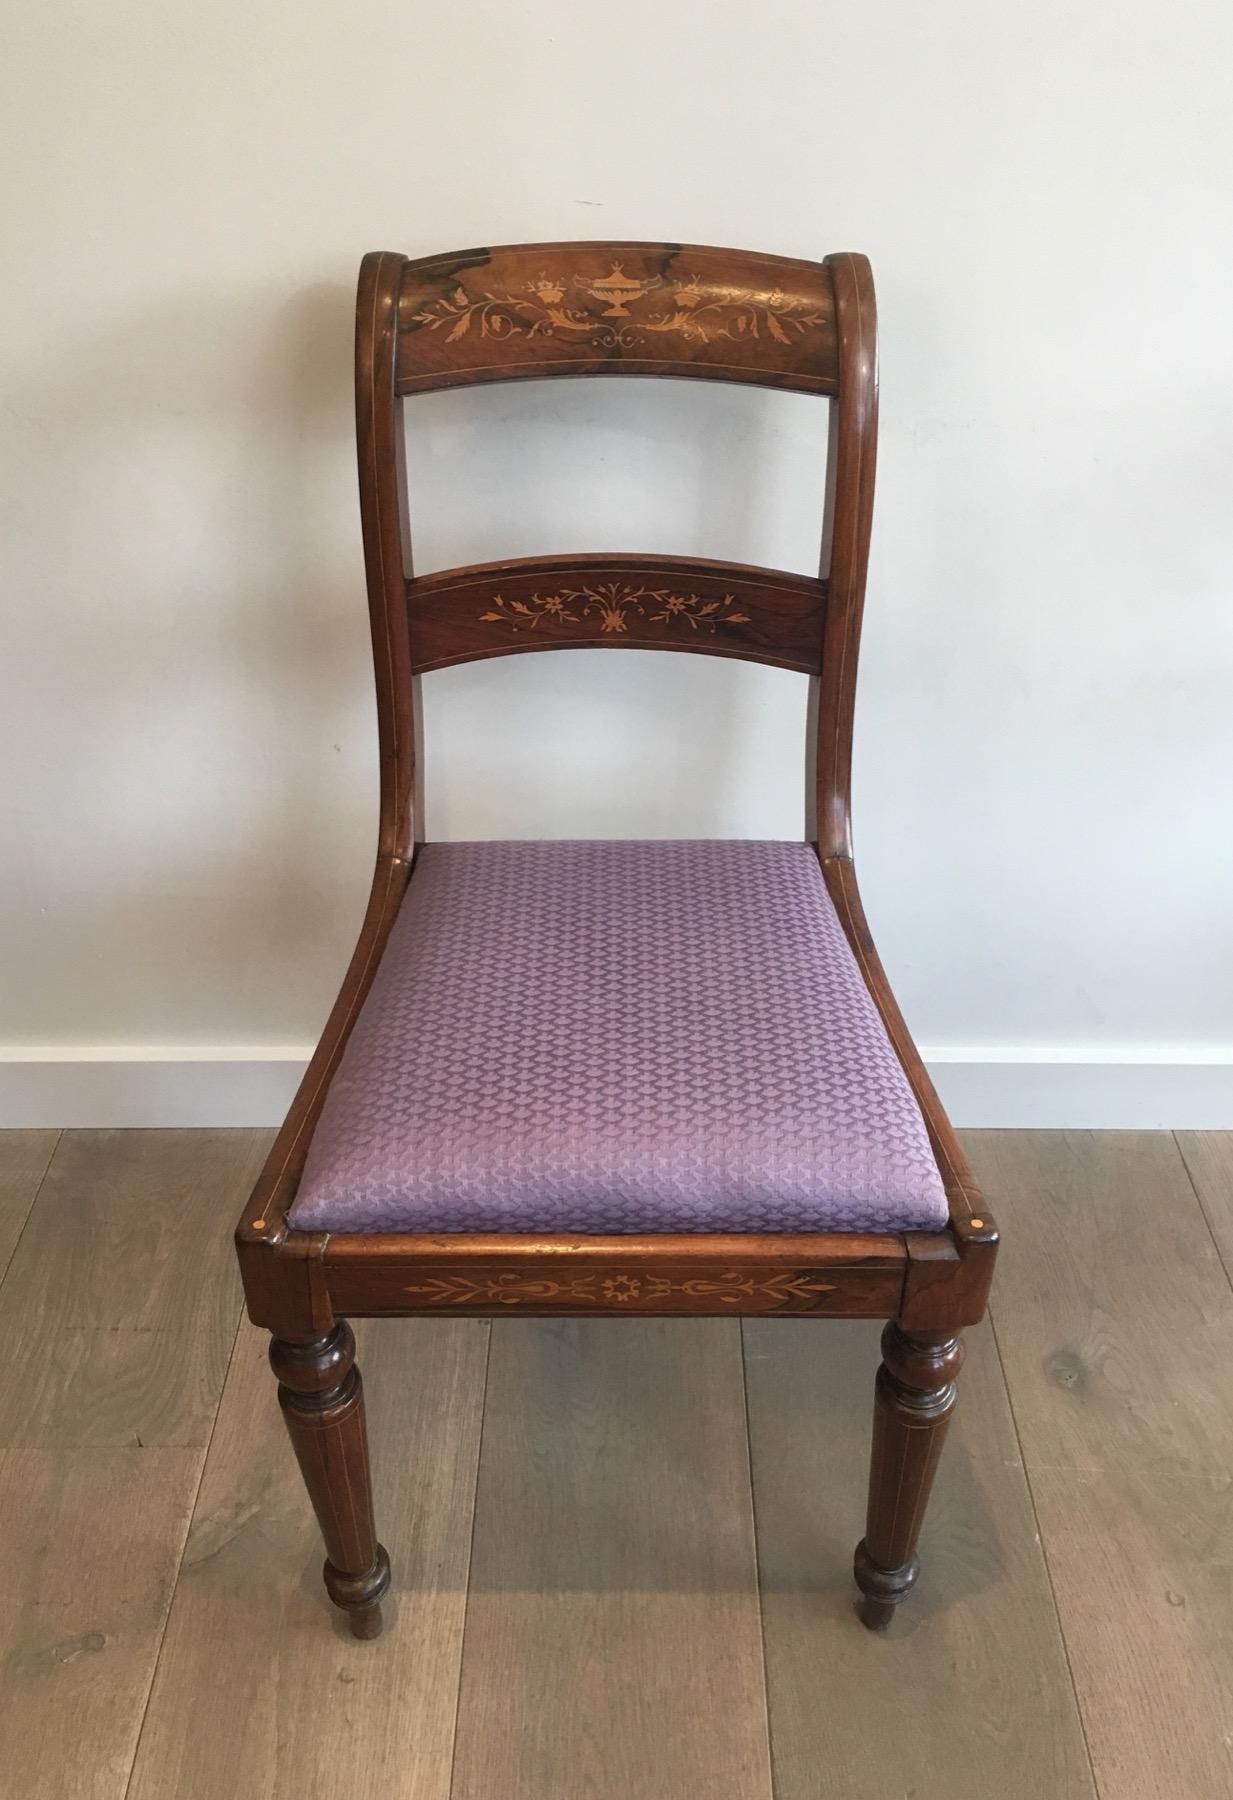 French Attributed to Jeanselme, Pair of Charles the Xth Rosewood and Lemon Tree Chairs